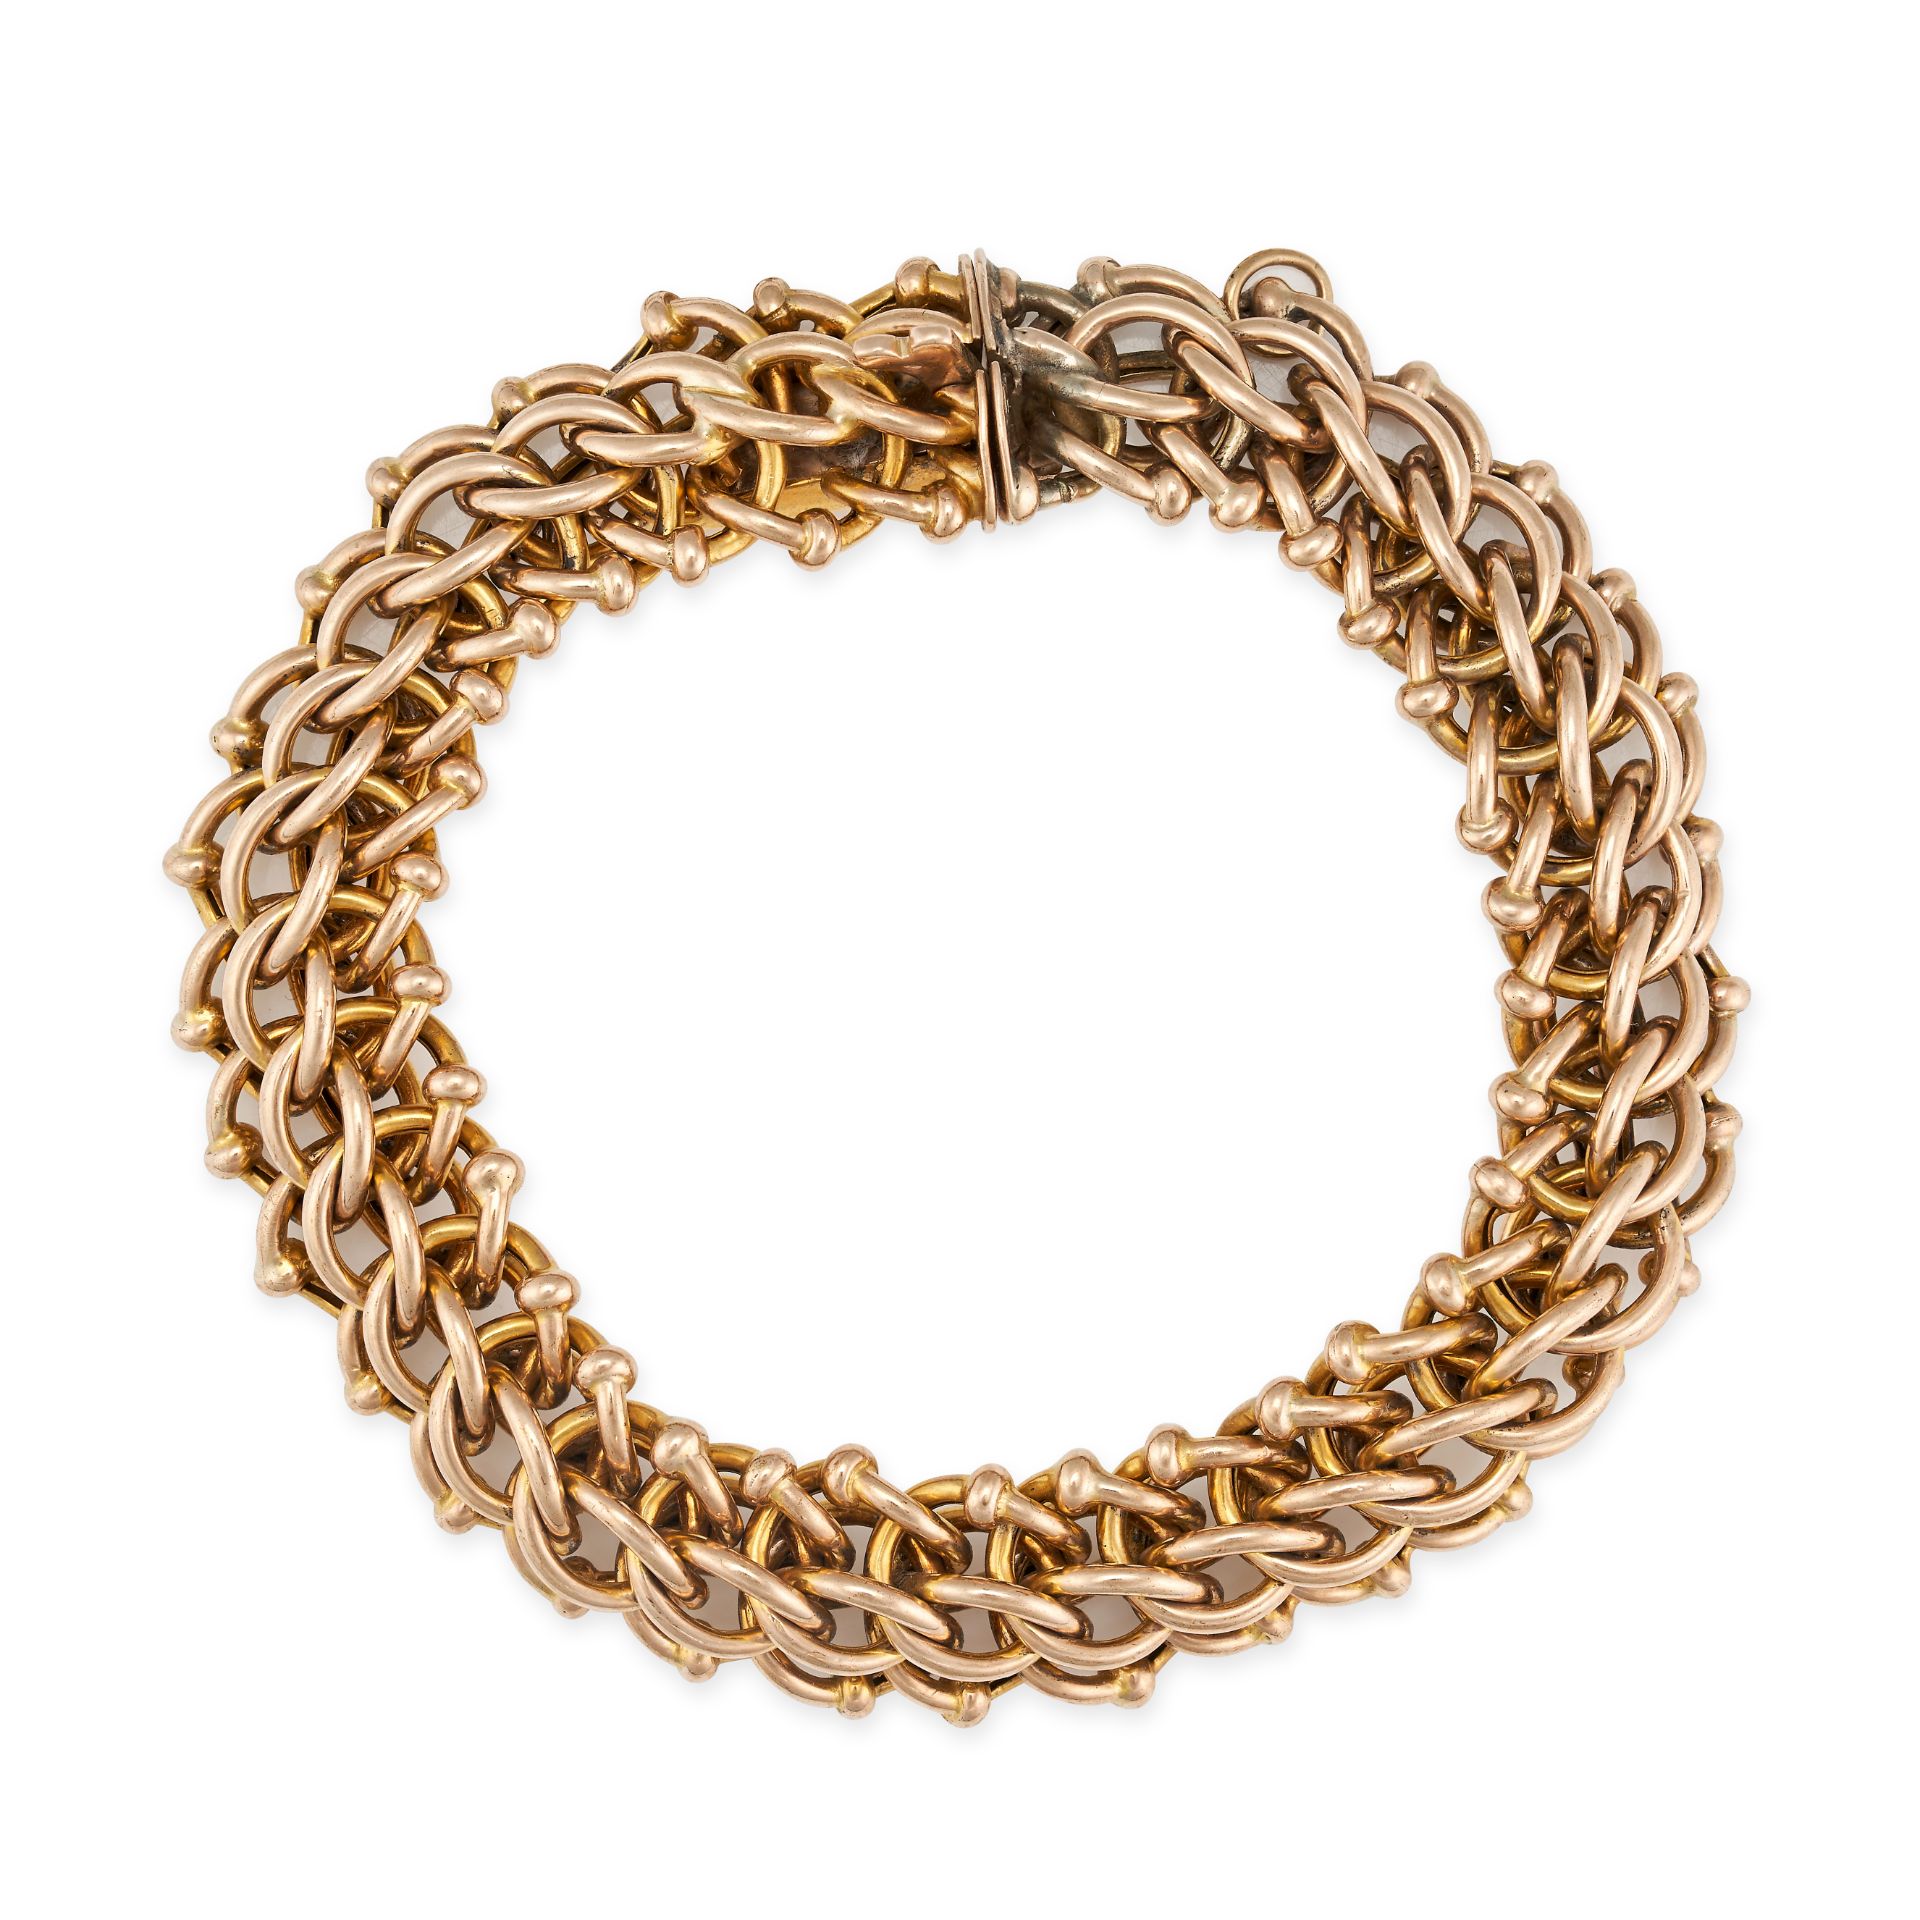 A GOLD BRACELET in 9ct yellow gold, comprising a row of woven fancy links, stamped 9CT, 17.0cm, 2...